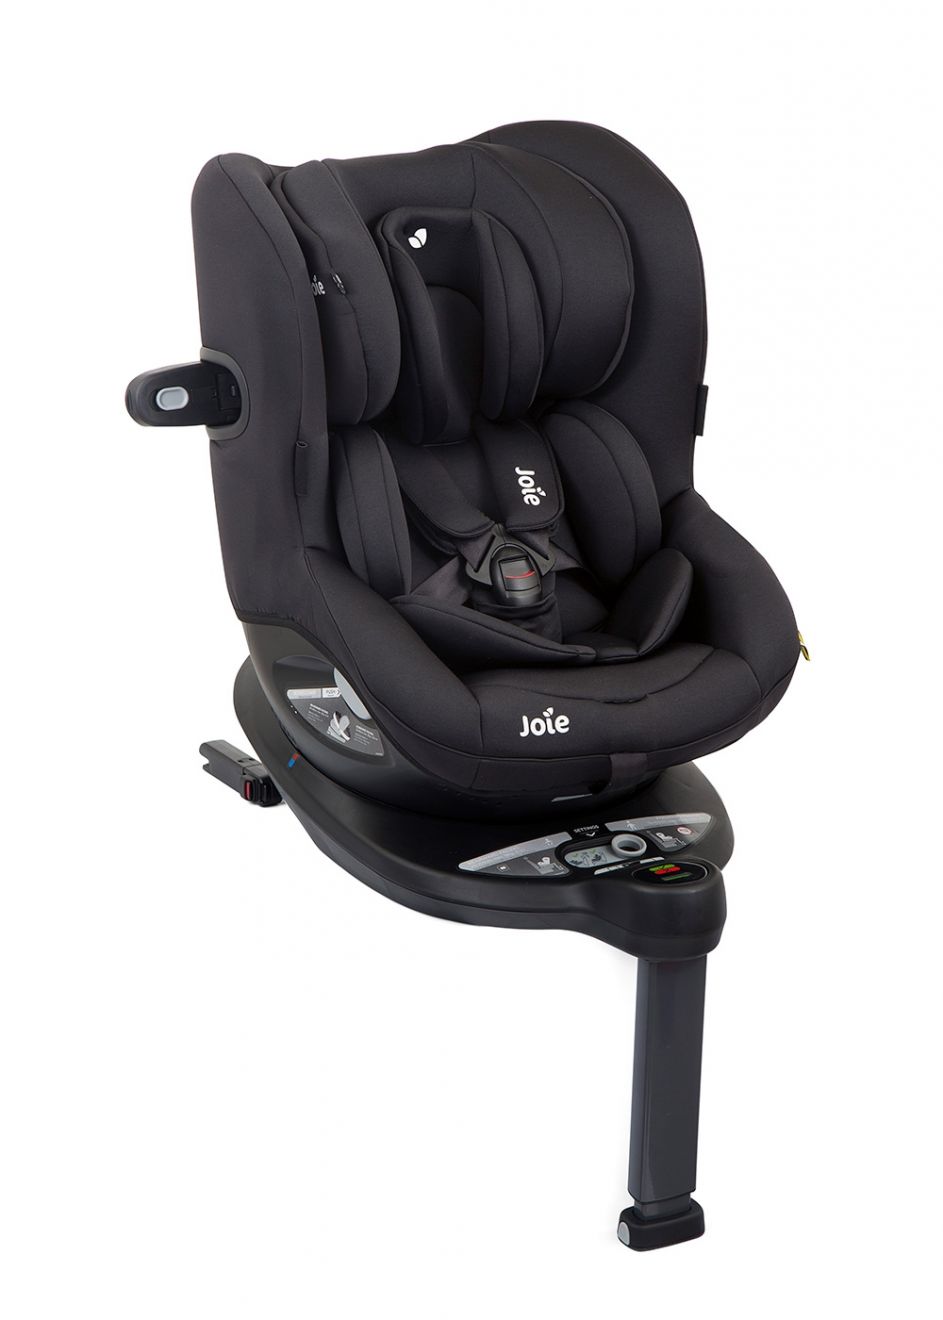 Joie i-Spin 360 i-size car seat in Coal